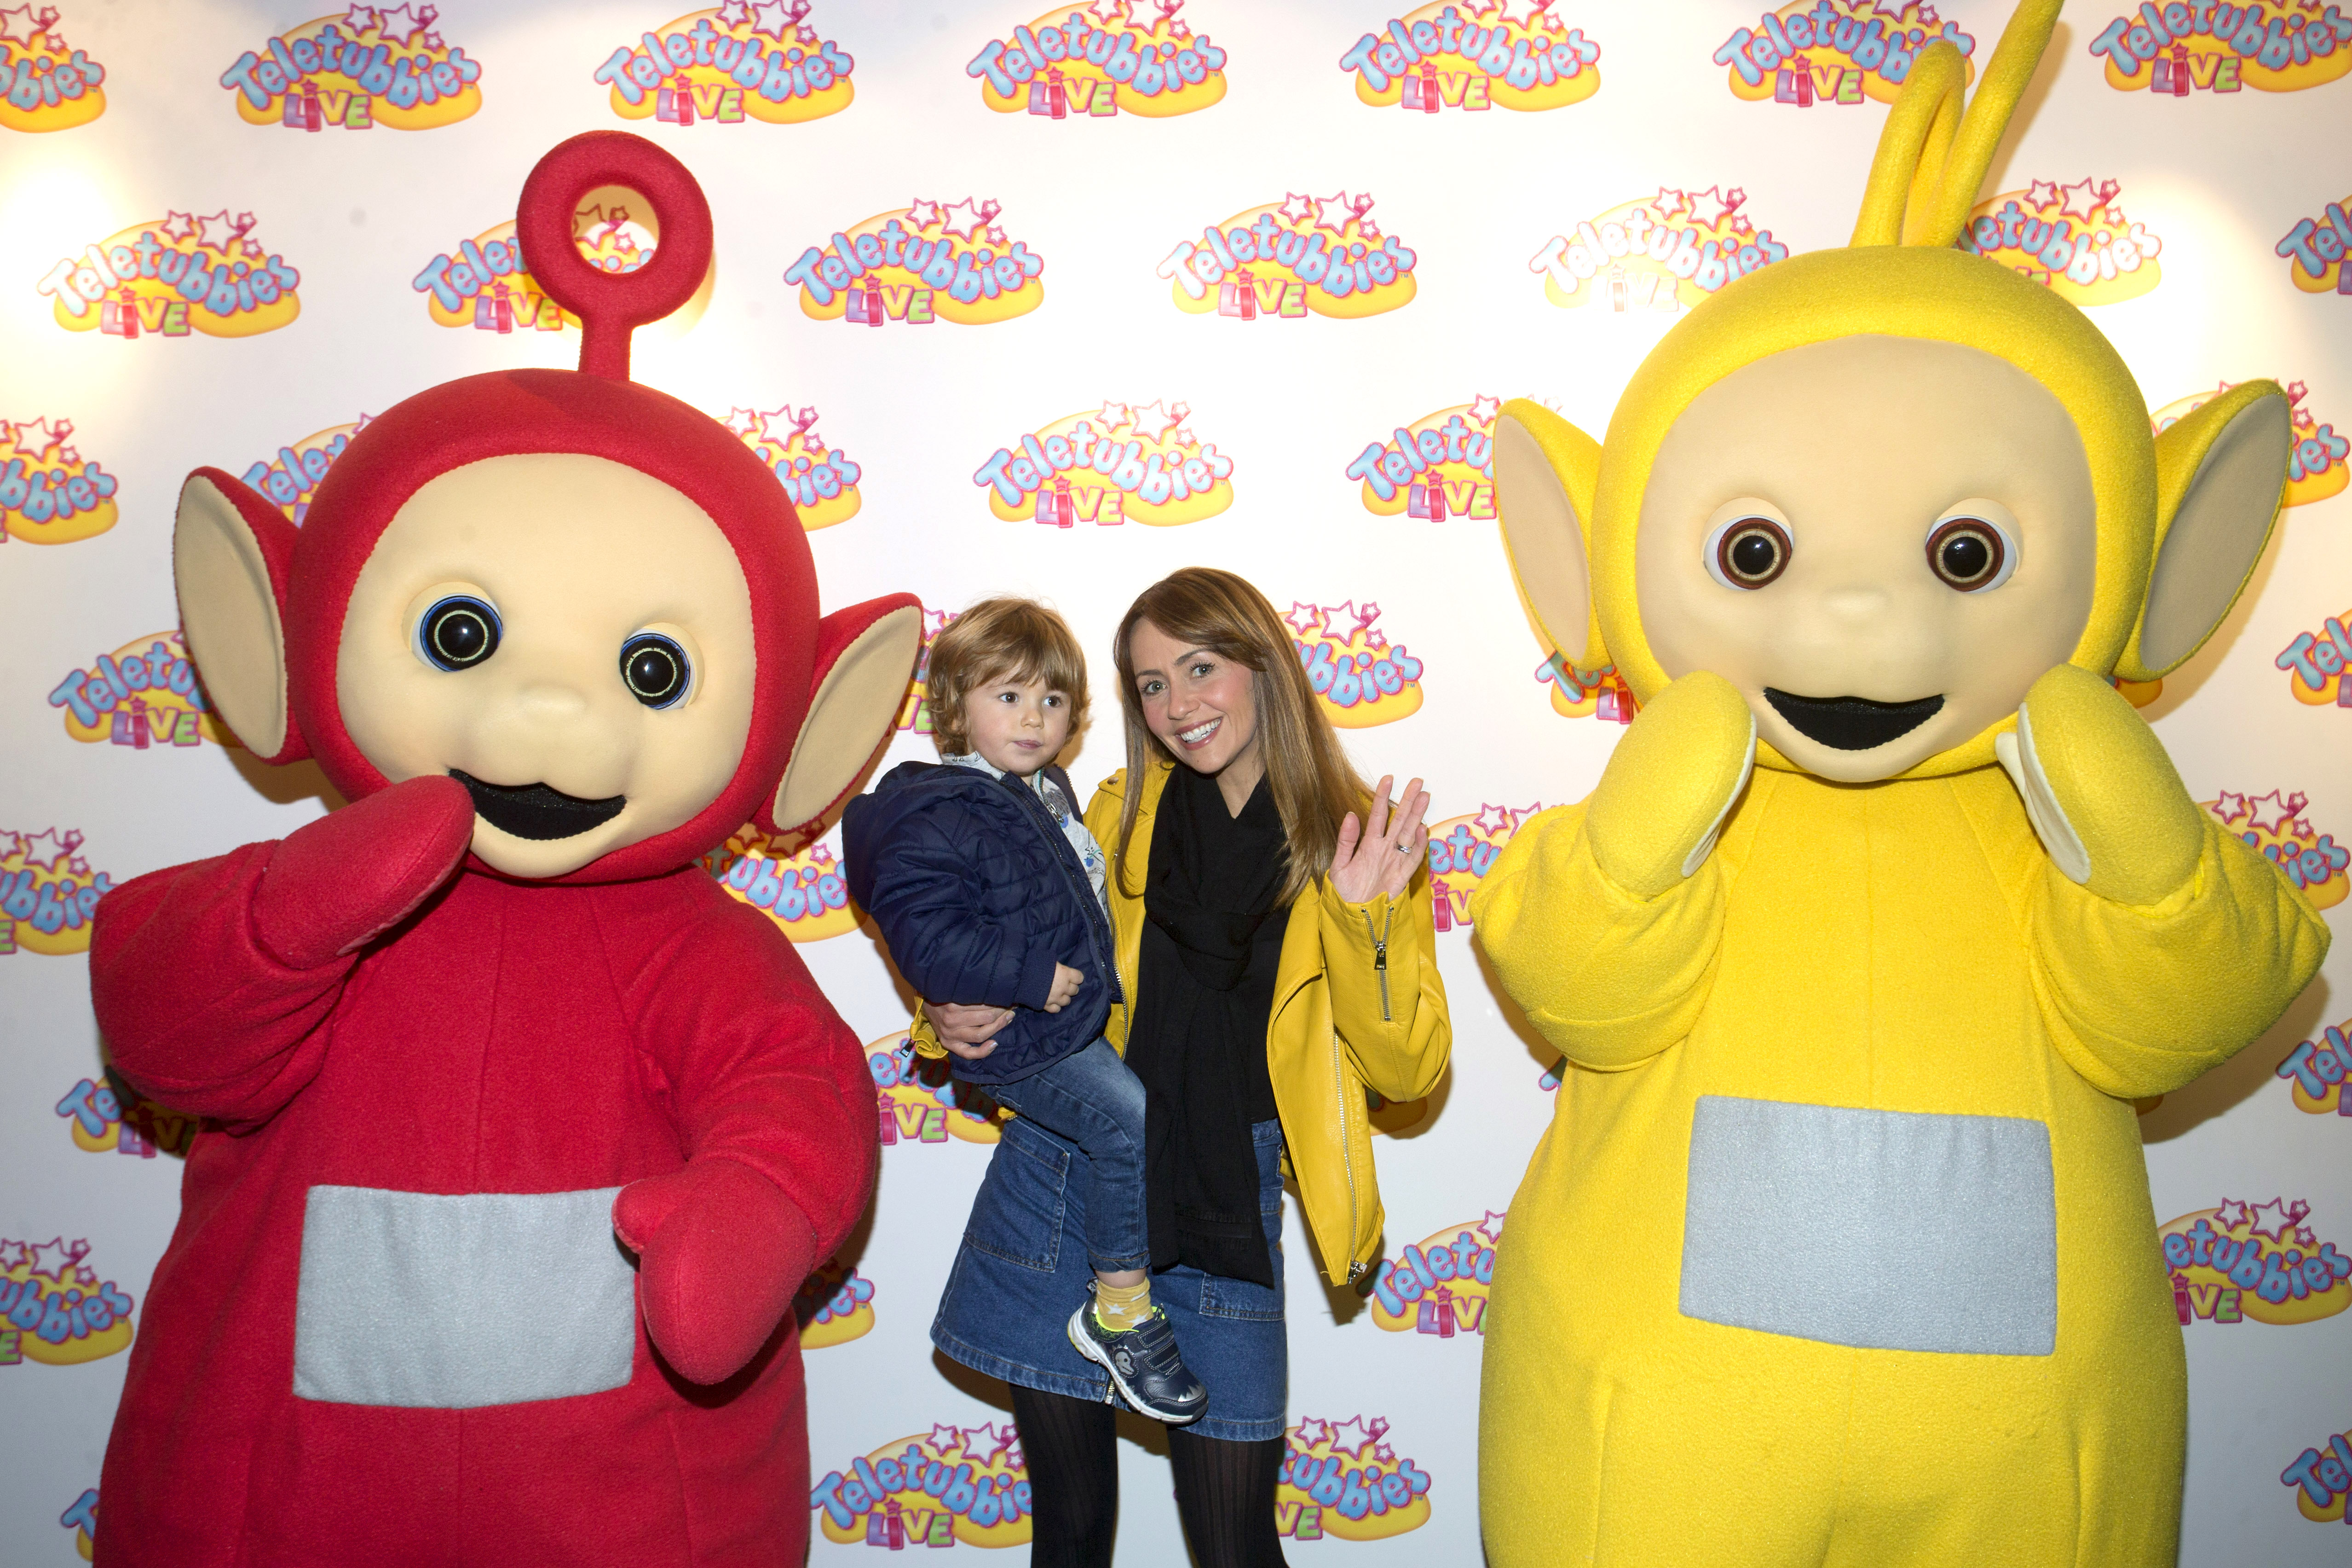 Teletubbies Live Premiere in Manchester 